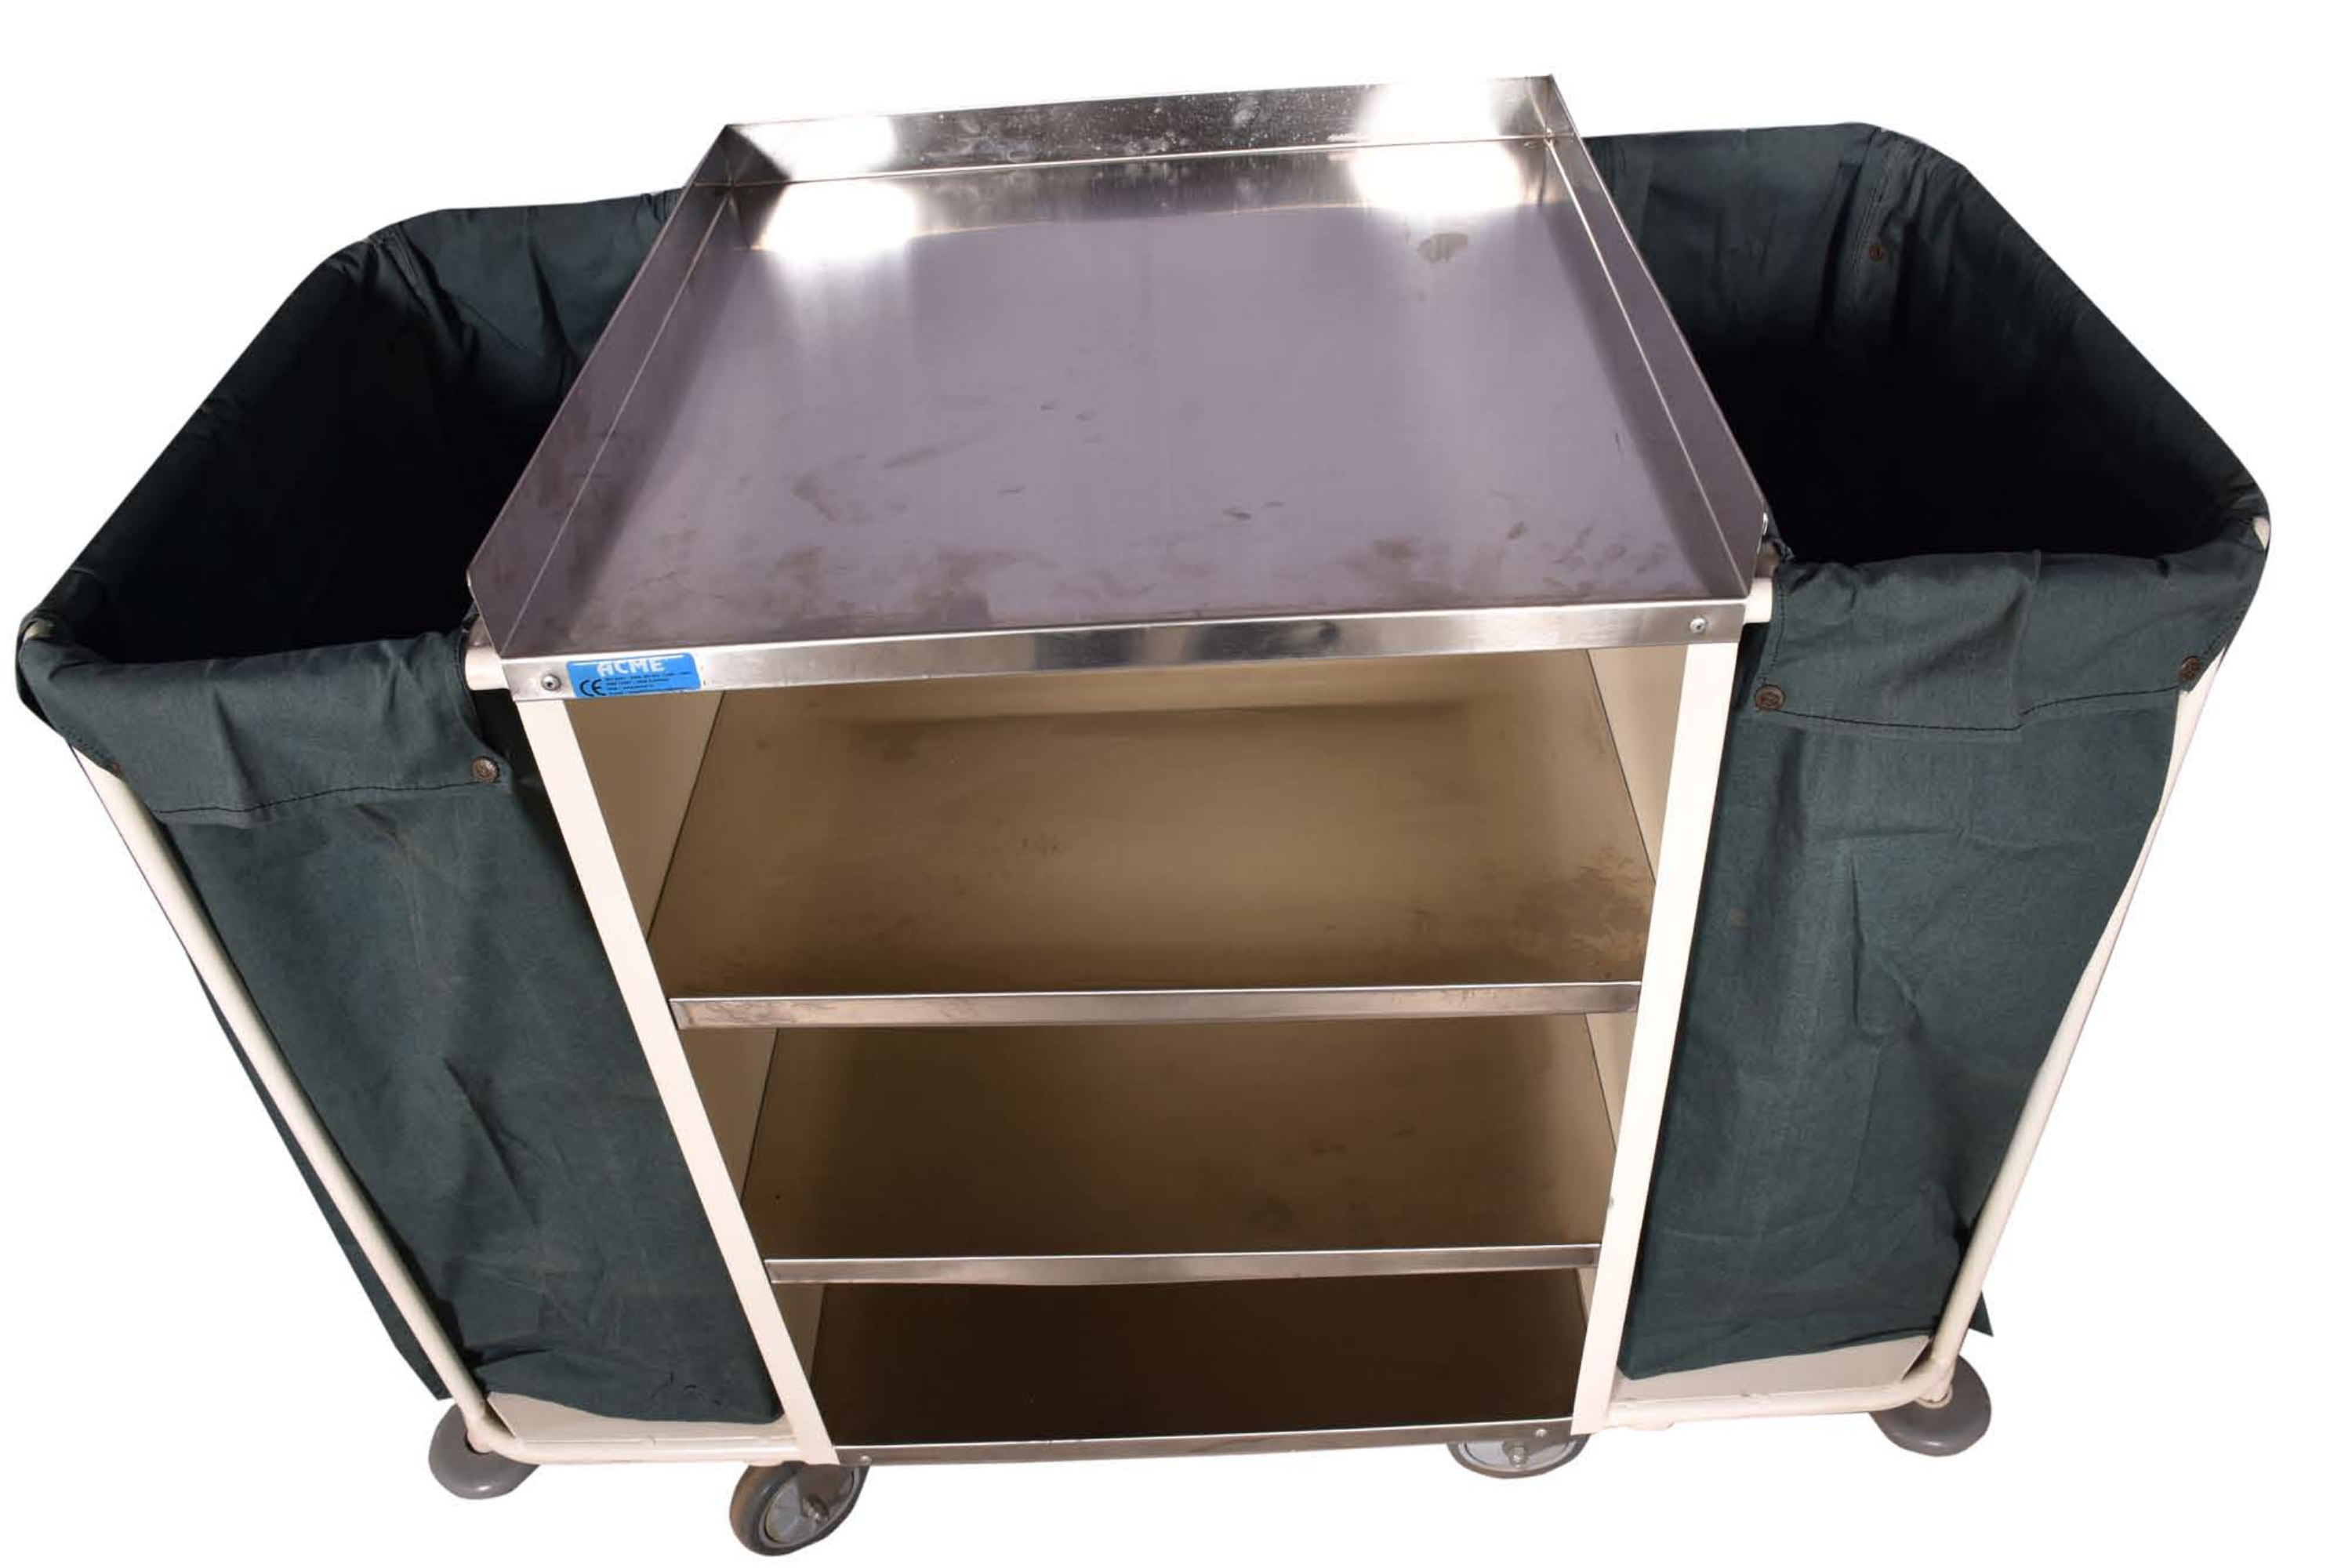 HOUSEKEEPING TROLLEY from ACME ENTERPRISES (A UNIT OF AEMPL)